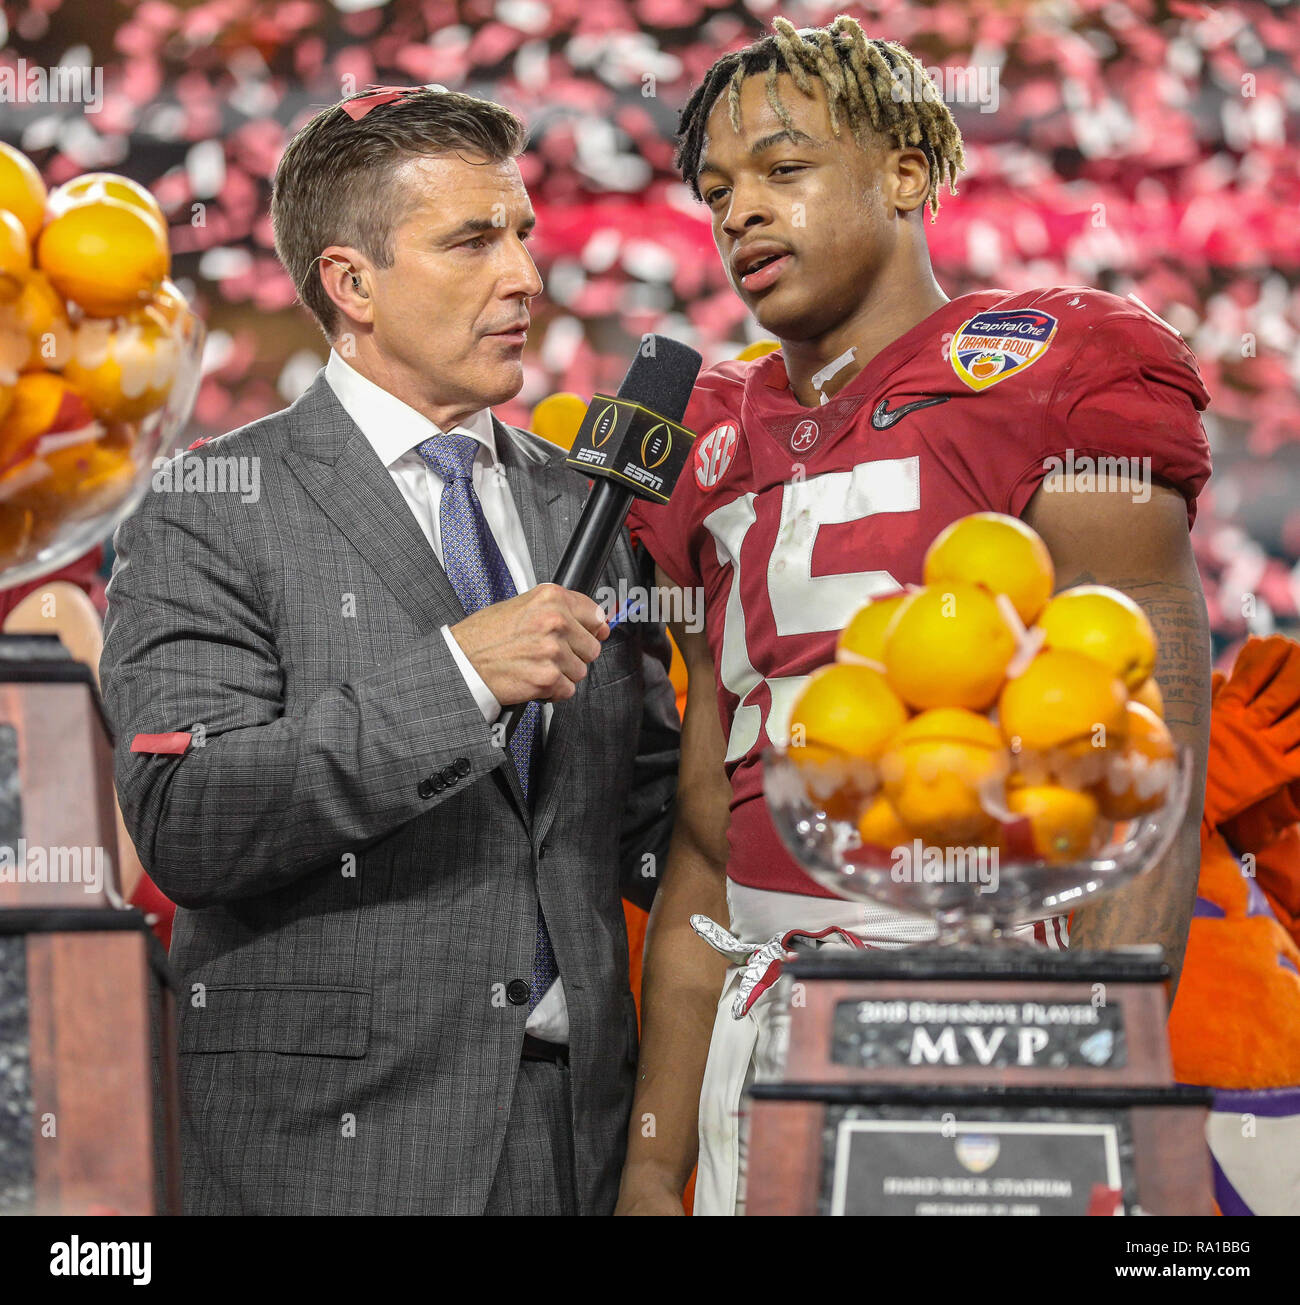 Miami Gardens, Florida, USA. 29th Dec, 2018. Defensive MVP Xavier McKinney #15 is interviewed by Rece Davis during the awards ceremony of the Capital One Orange Bowl game between the Alabama Crimson Tide and the Oklahoma Sooners at Hard Rock Stadium in Miami Gardens, Florida. Kyle Okita/CSM/Alamy Live News Stock Photo